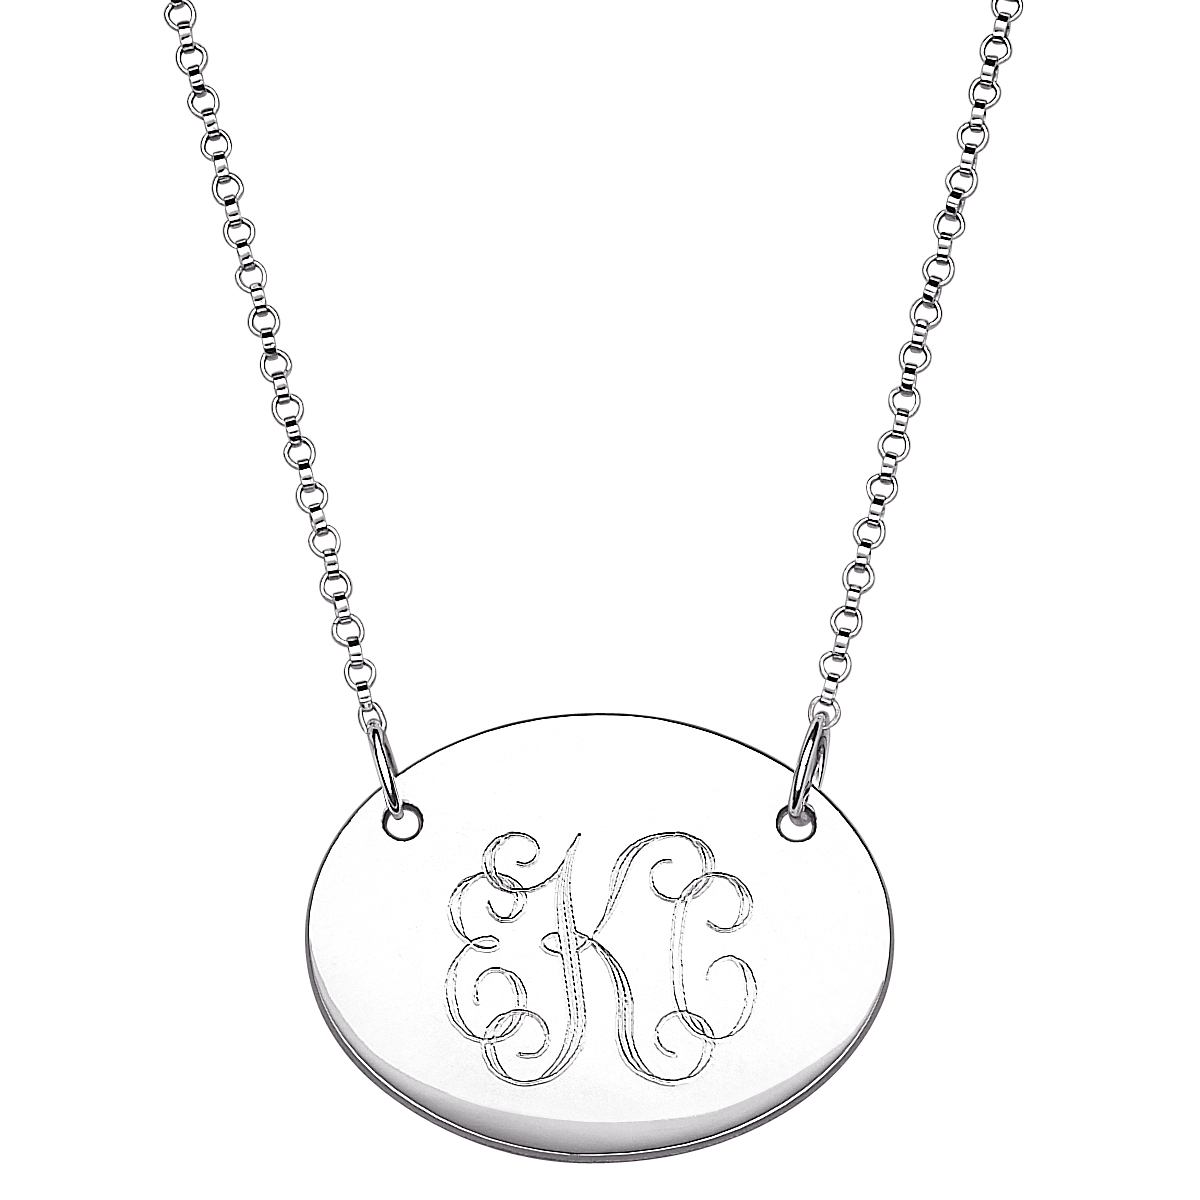 Sterling Silver Oval Tag Engraved Monogram Necklace